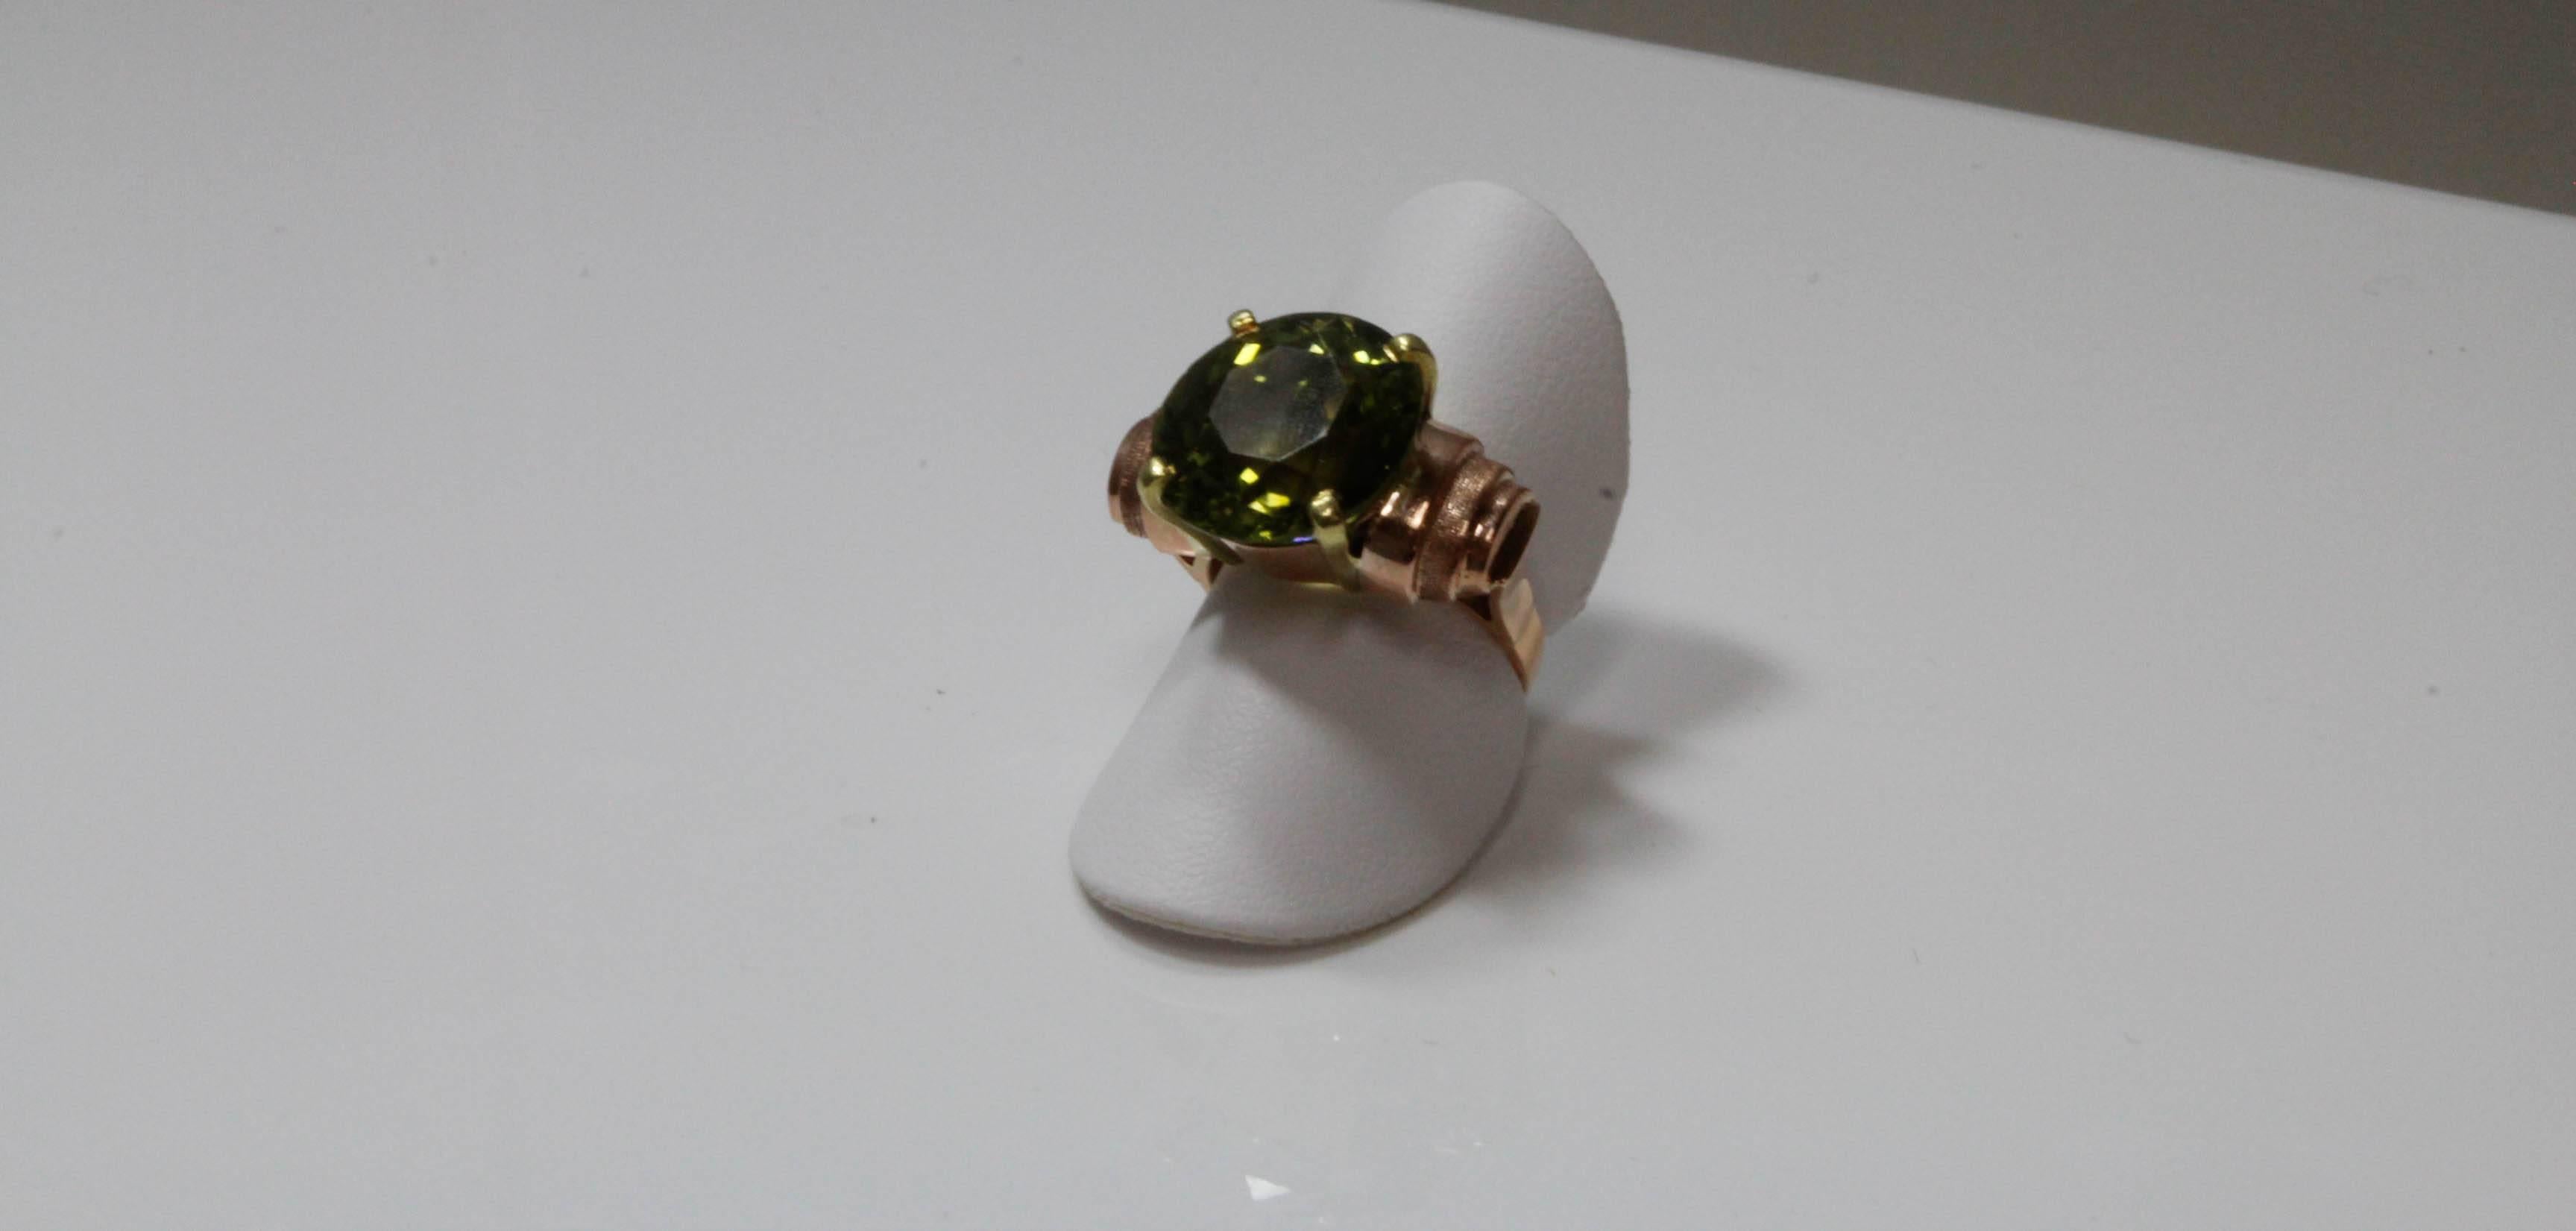 18 kt rose gold, retro peridot ring. 
14 cts Peridot, very brilliant.
Size: 6 1/2
Mounting not bearing gold standard mark, but has been tested.